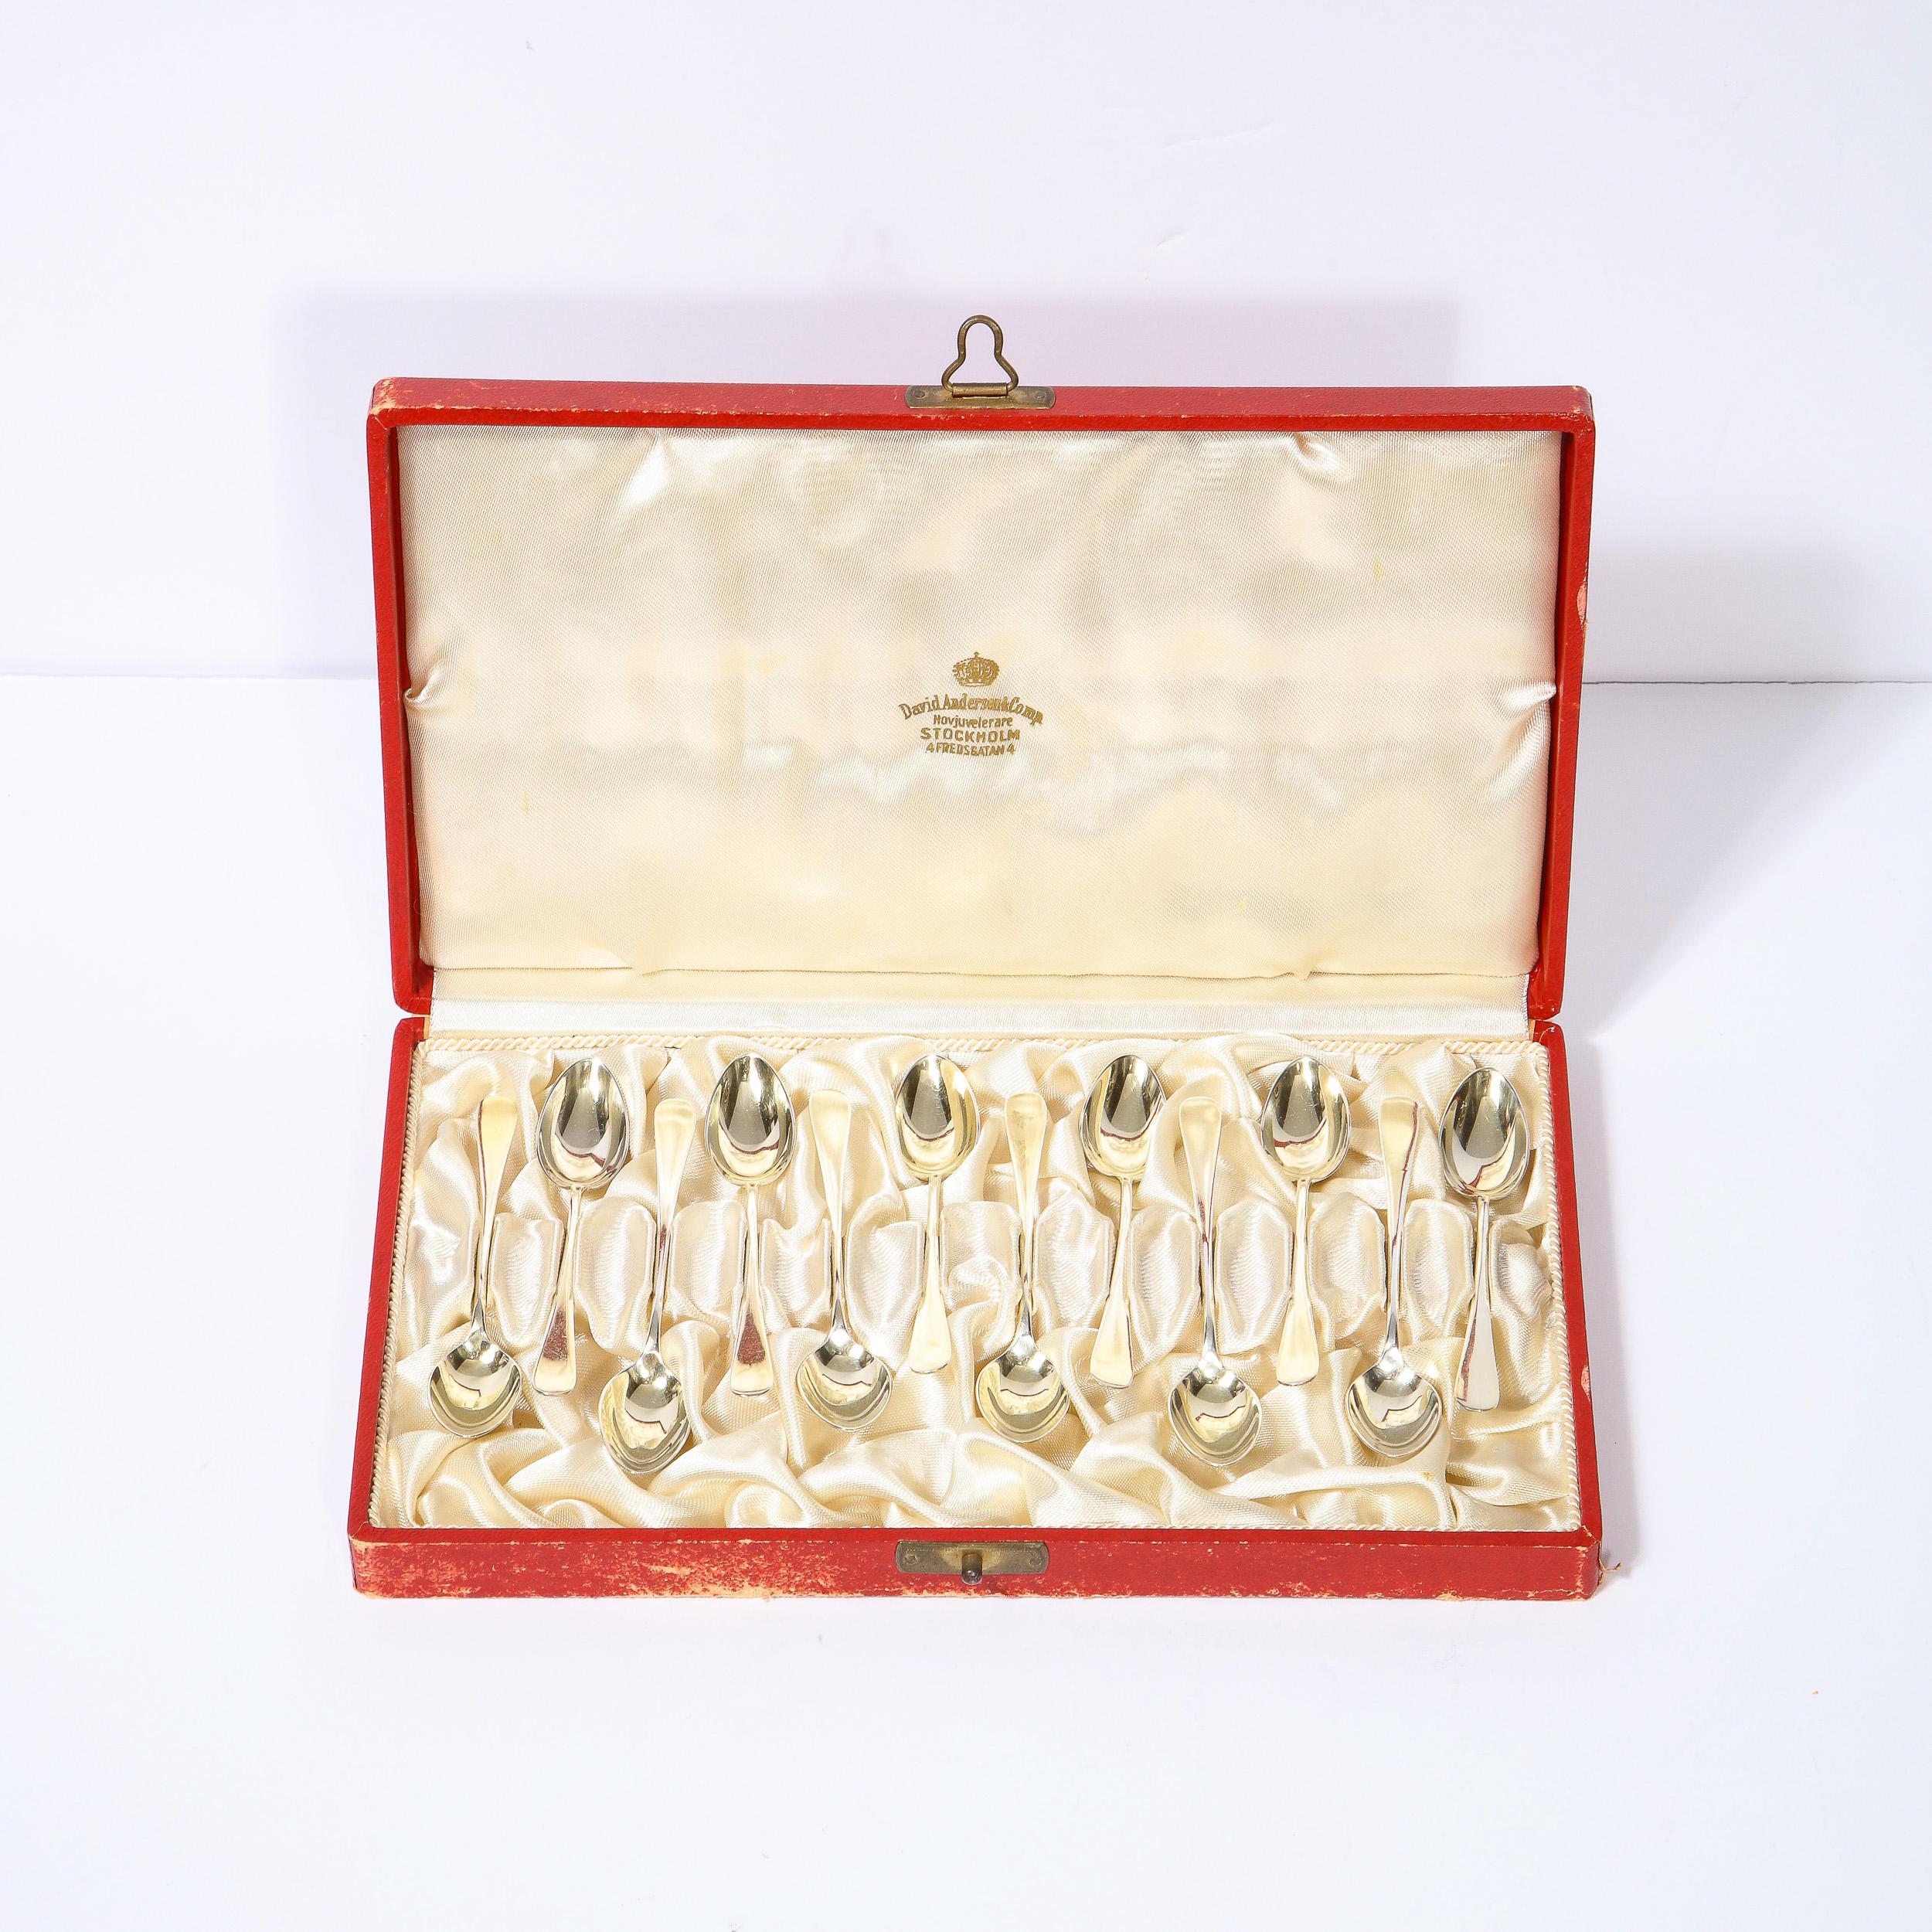 This stunning set of 12 demi tasse gilt sterling silver spoons were realized by the fabled atelier of Swedish designer David Andersen circa 1950. They feature rectangular handles that flare slightly to rounded ends, and concave rounded oval bowls.